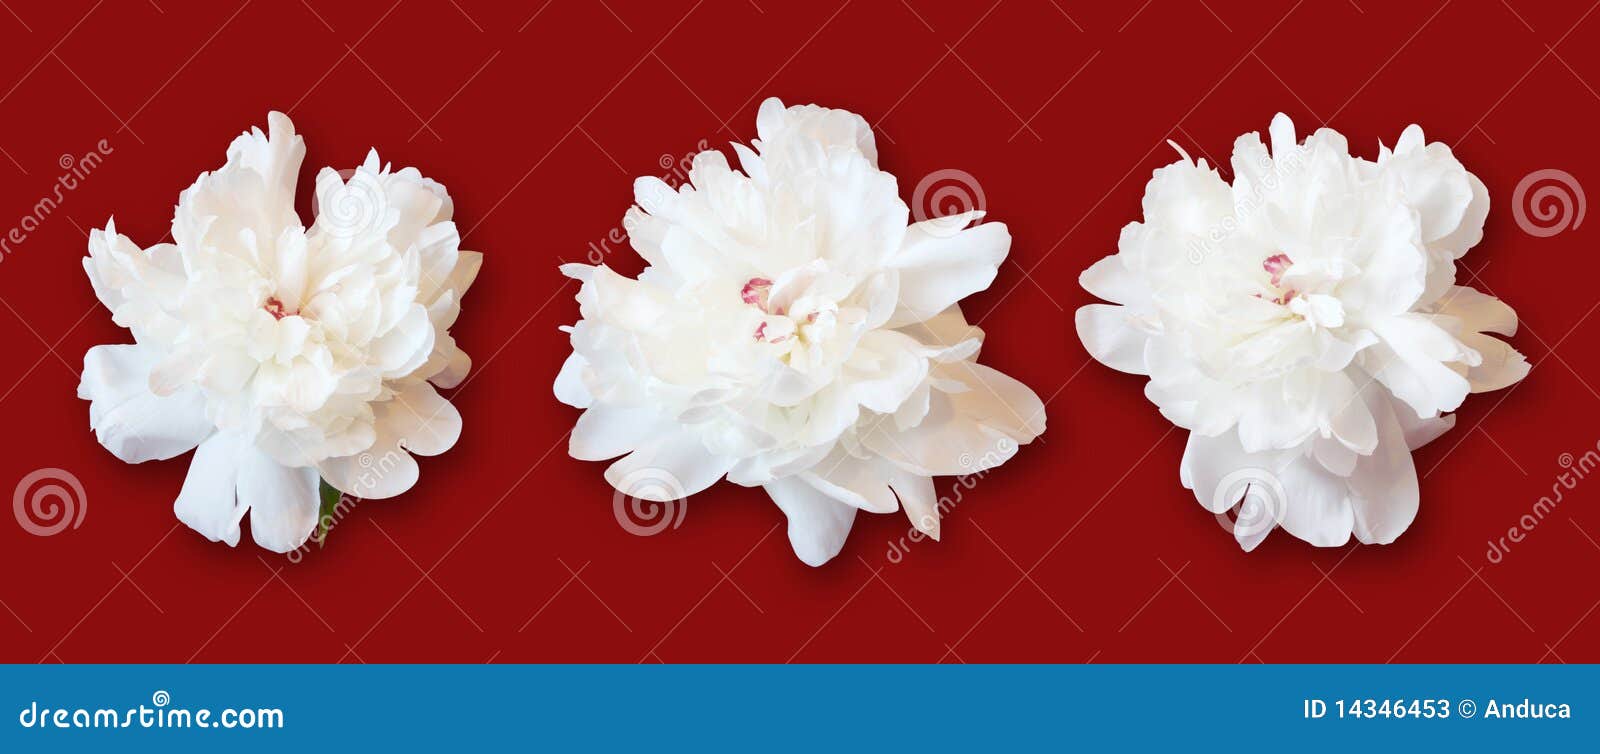 white peonies on red background